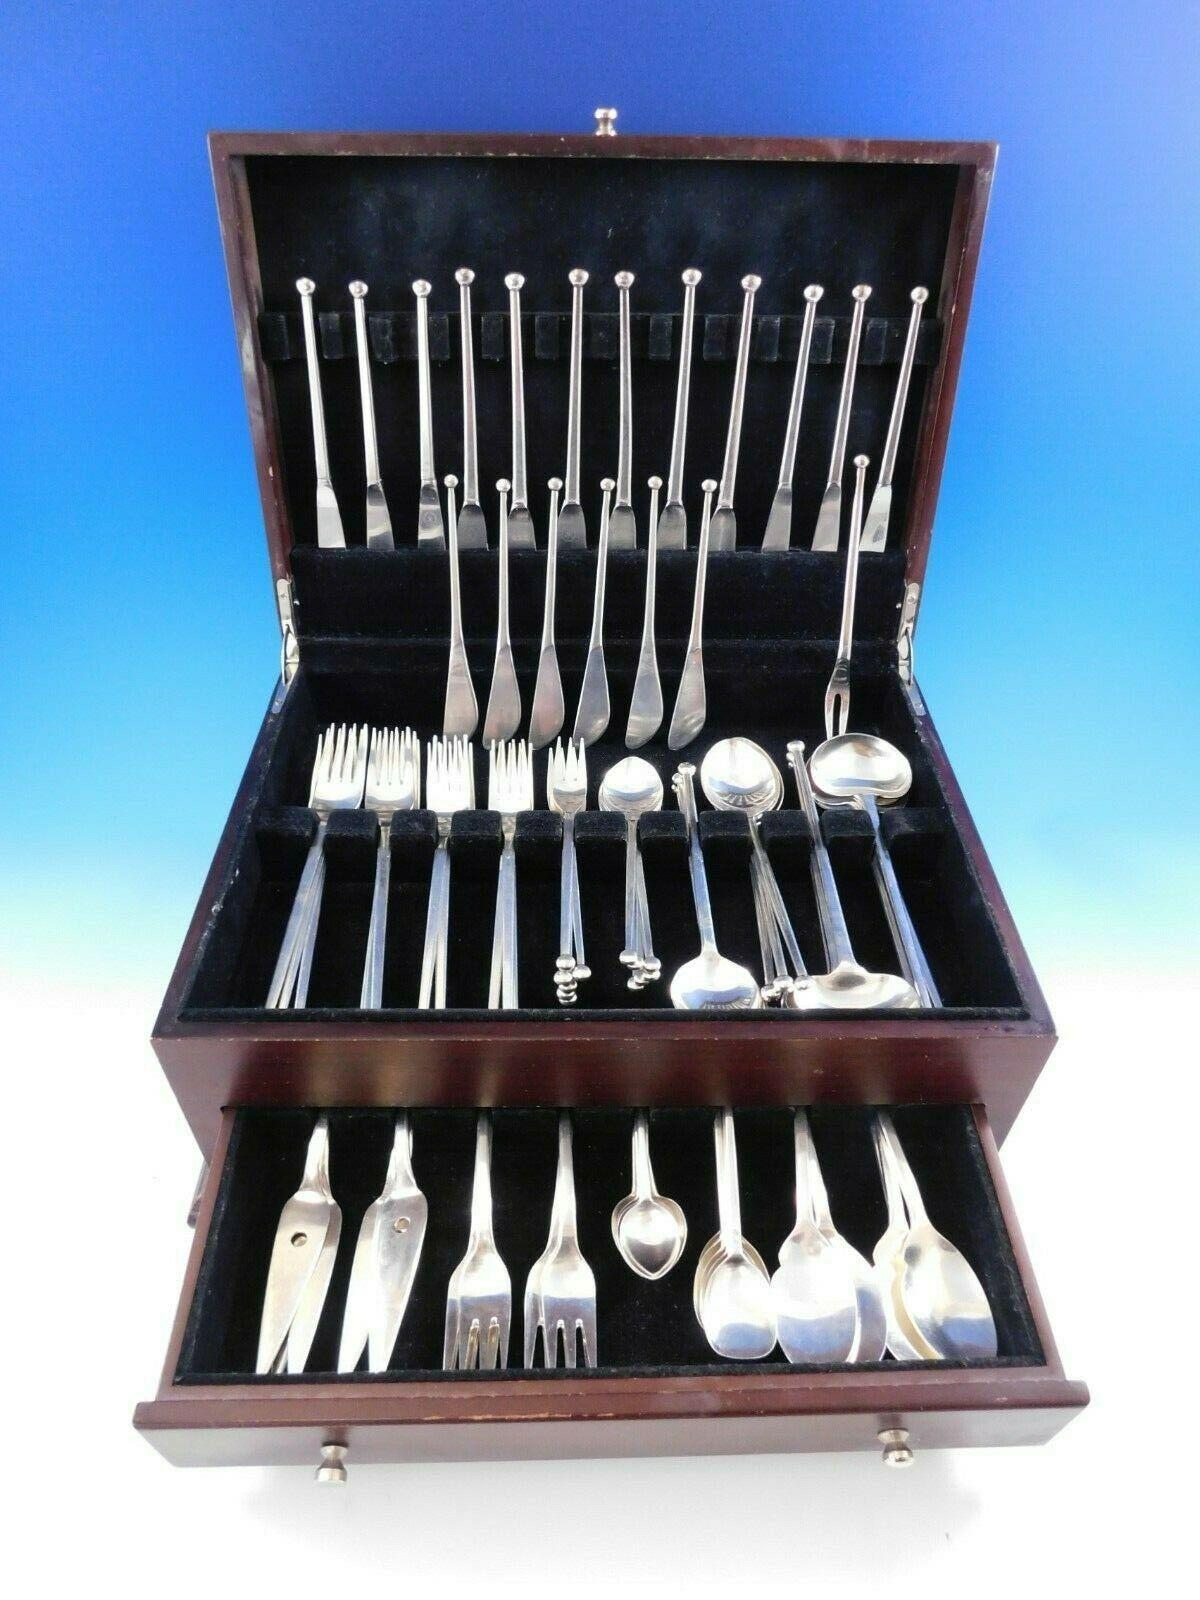 Josef Hoffmann

Exceedingly rare Mid-Century Modern 85 piece set of sterling silver flatware designed by Josef Hoffmann (Germany) in the innovative “Pott 86” pattern. This superb set includes:

6 dinner knives, 8